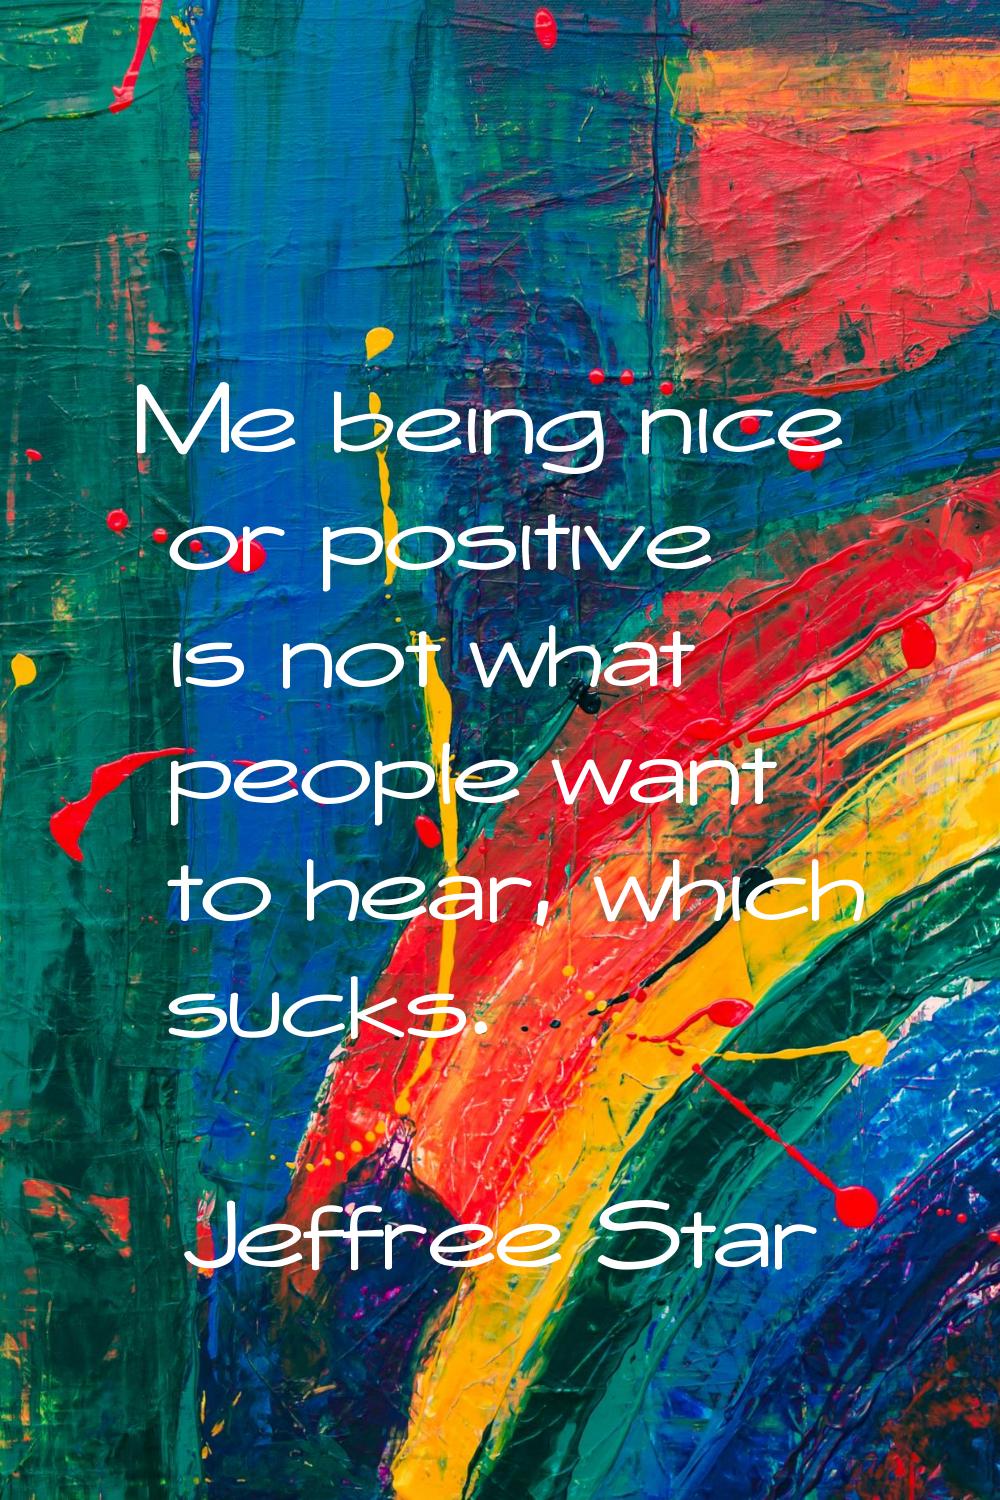 Me being nice or positive is not what people want to hear, which sucks.